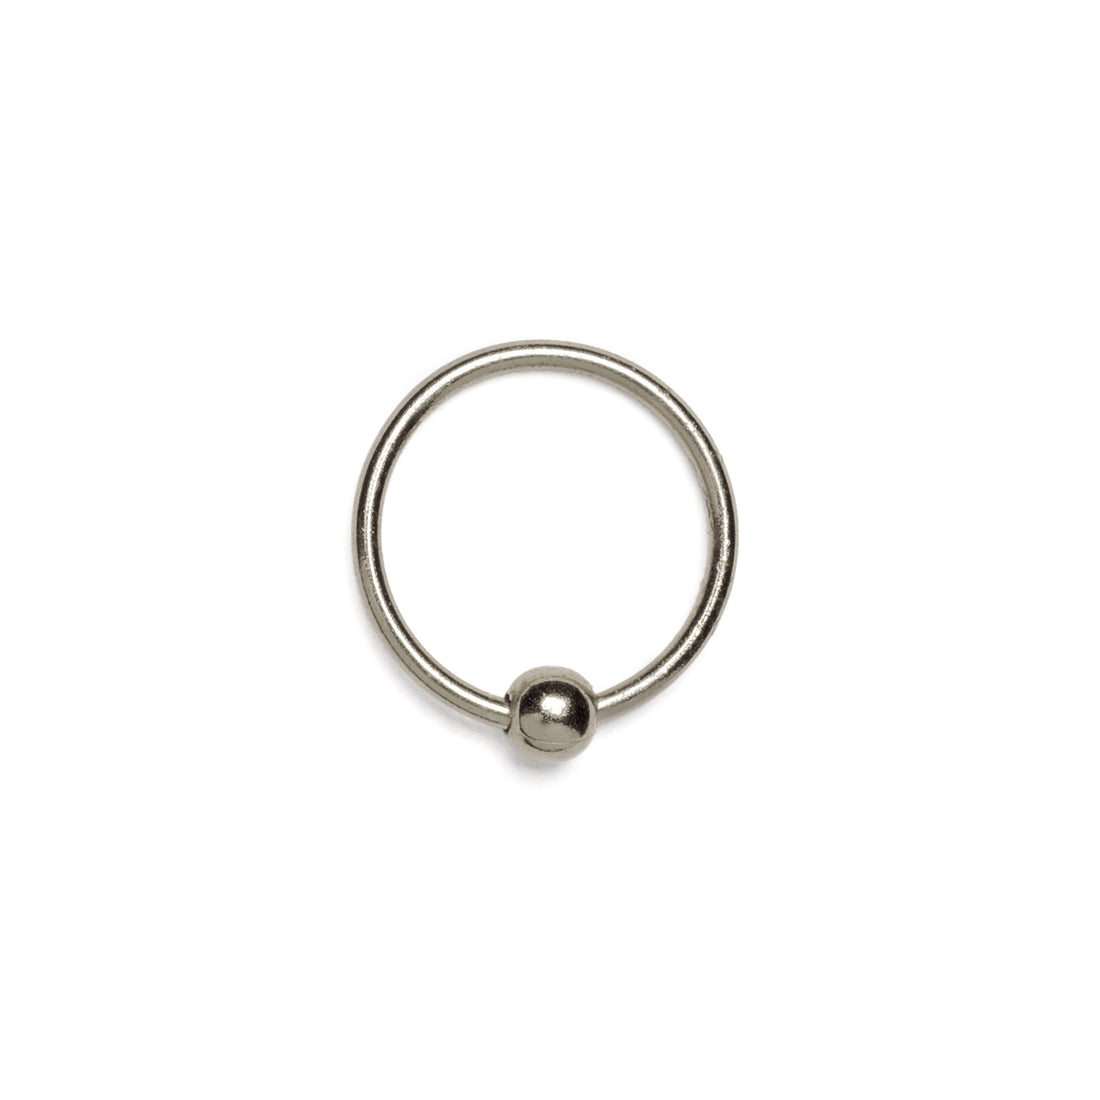 8mm Dhevan silver piercing ring with ball closure frontal view